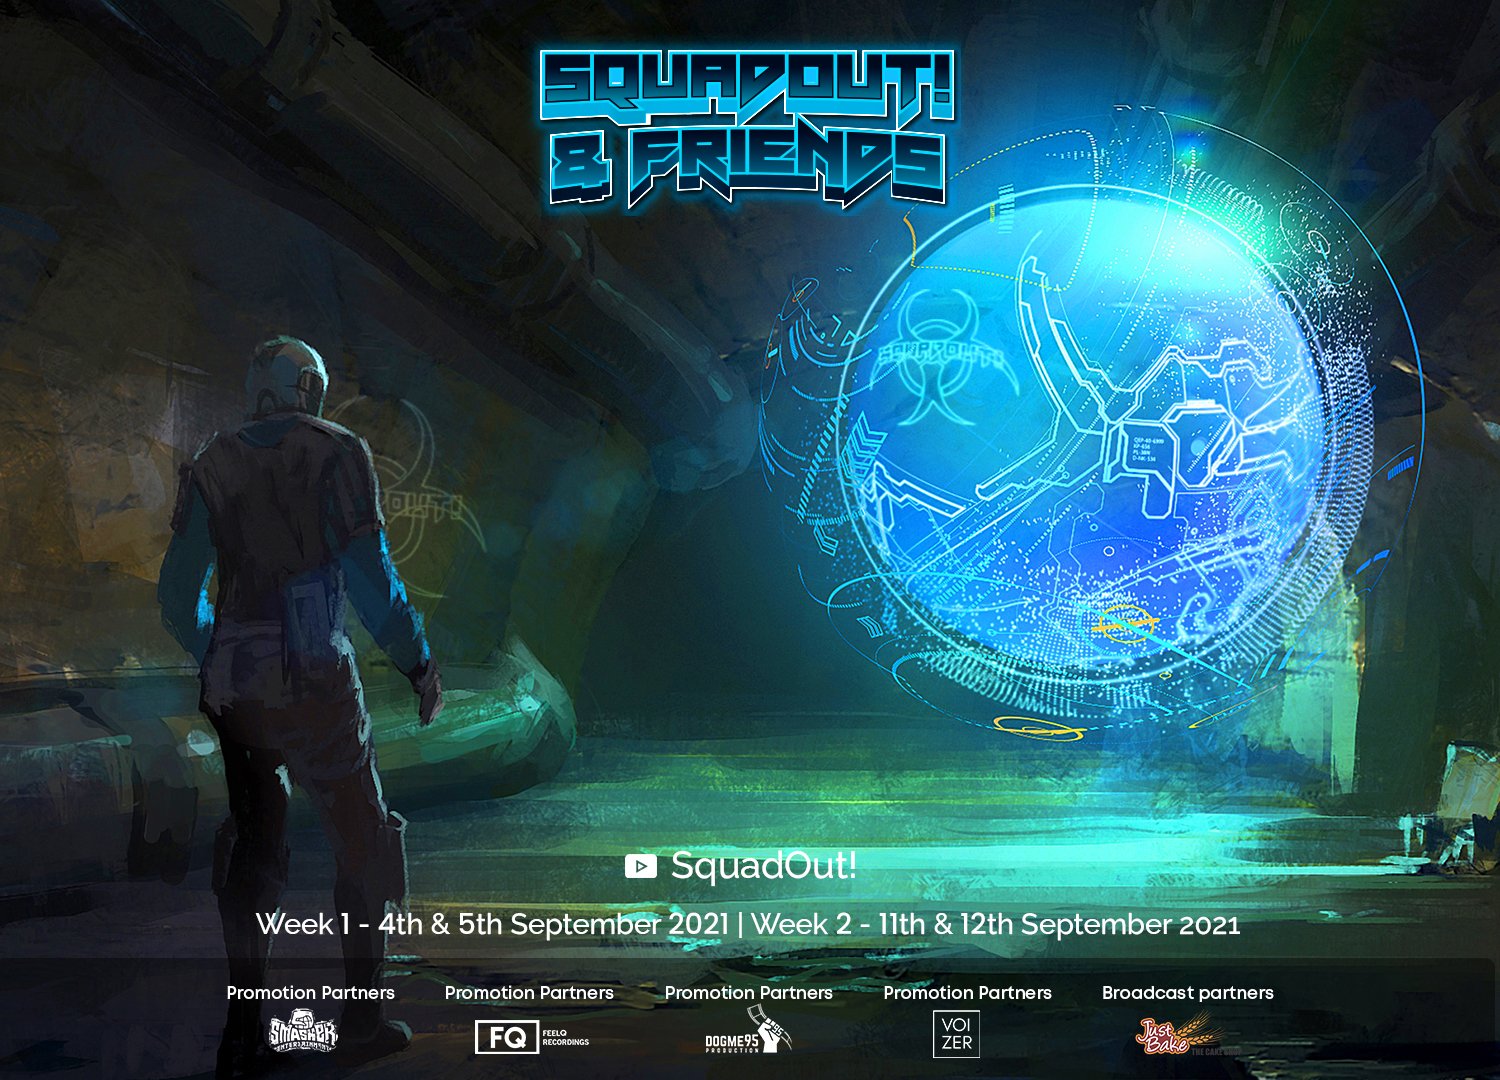 SquadOut’s ‘Virtual Music Festival’ hits this September